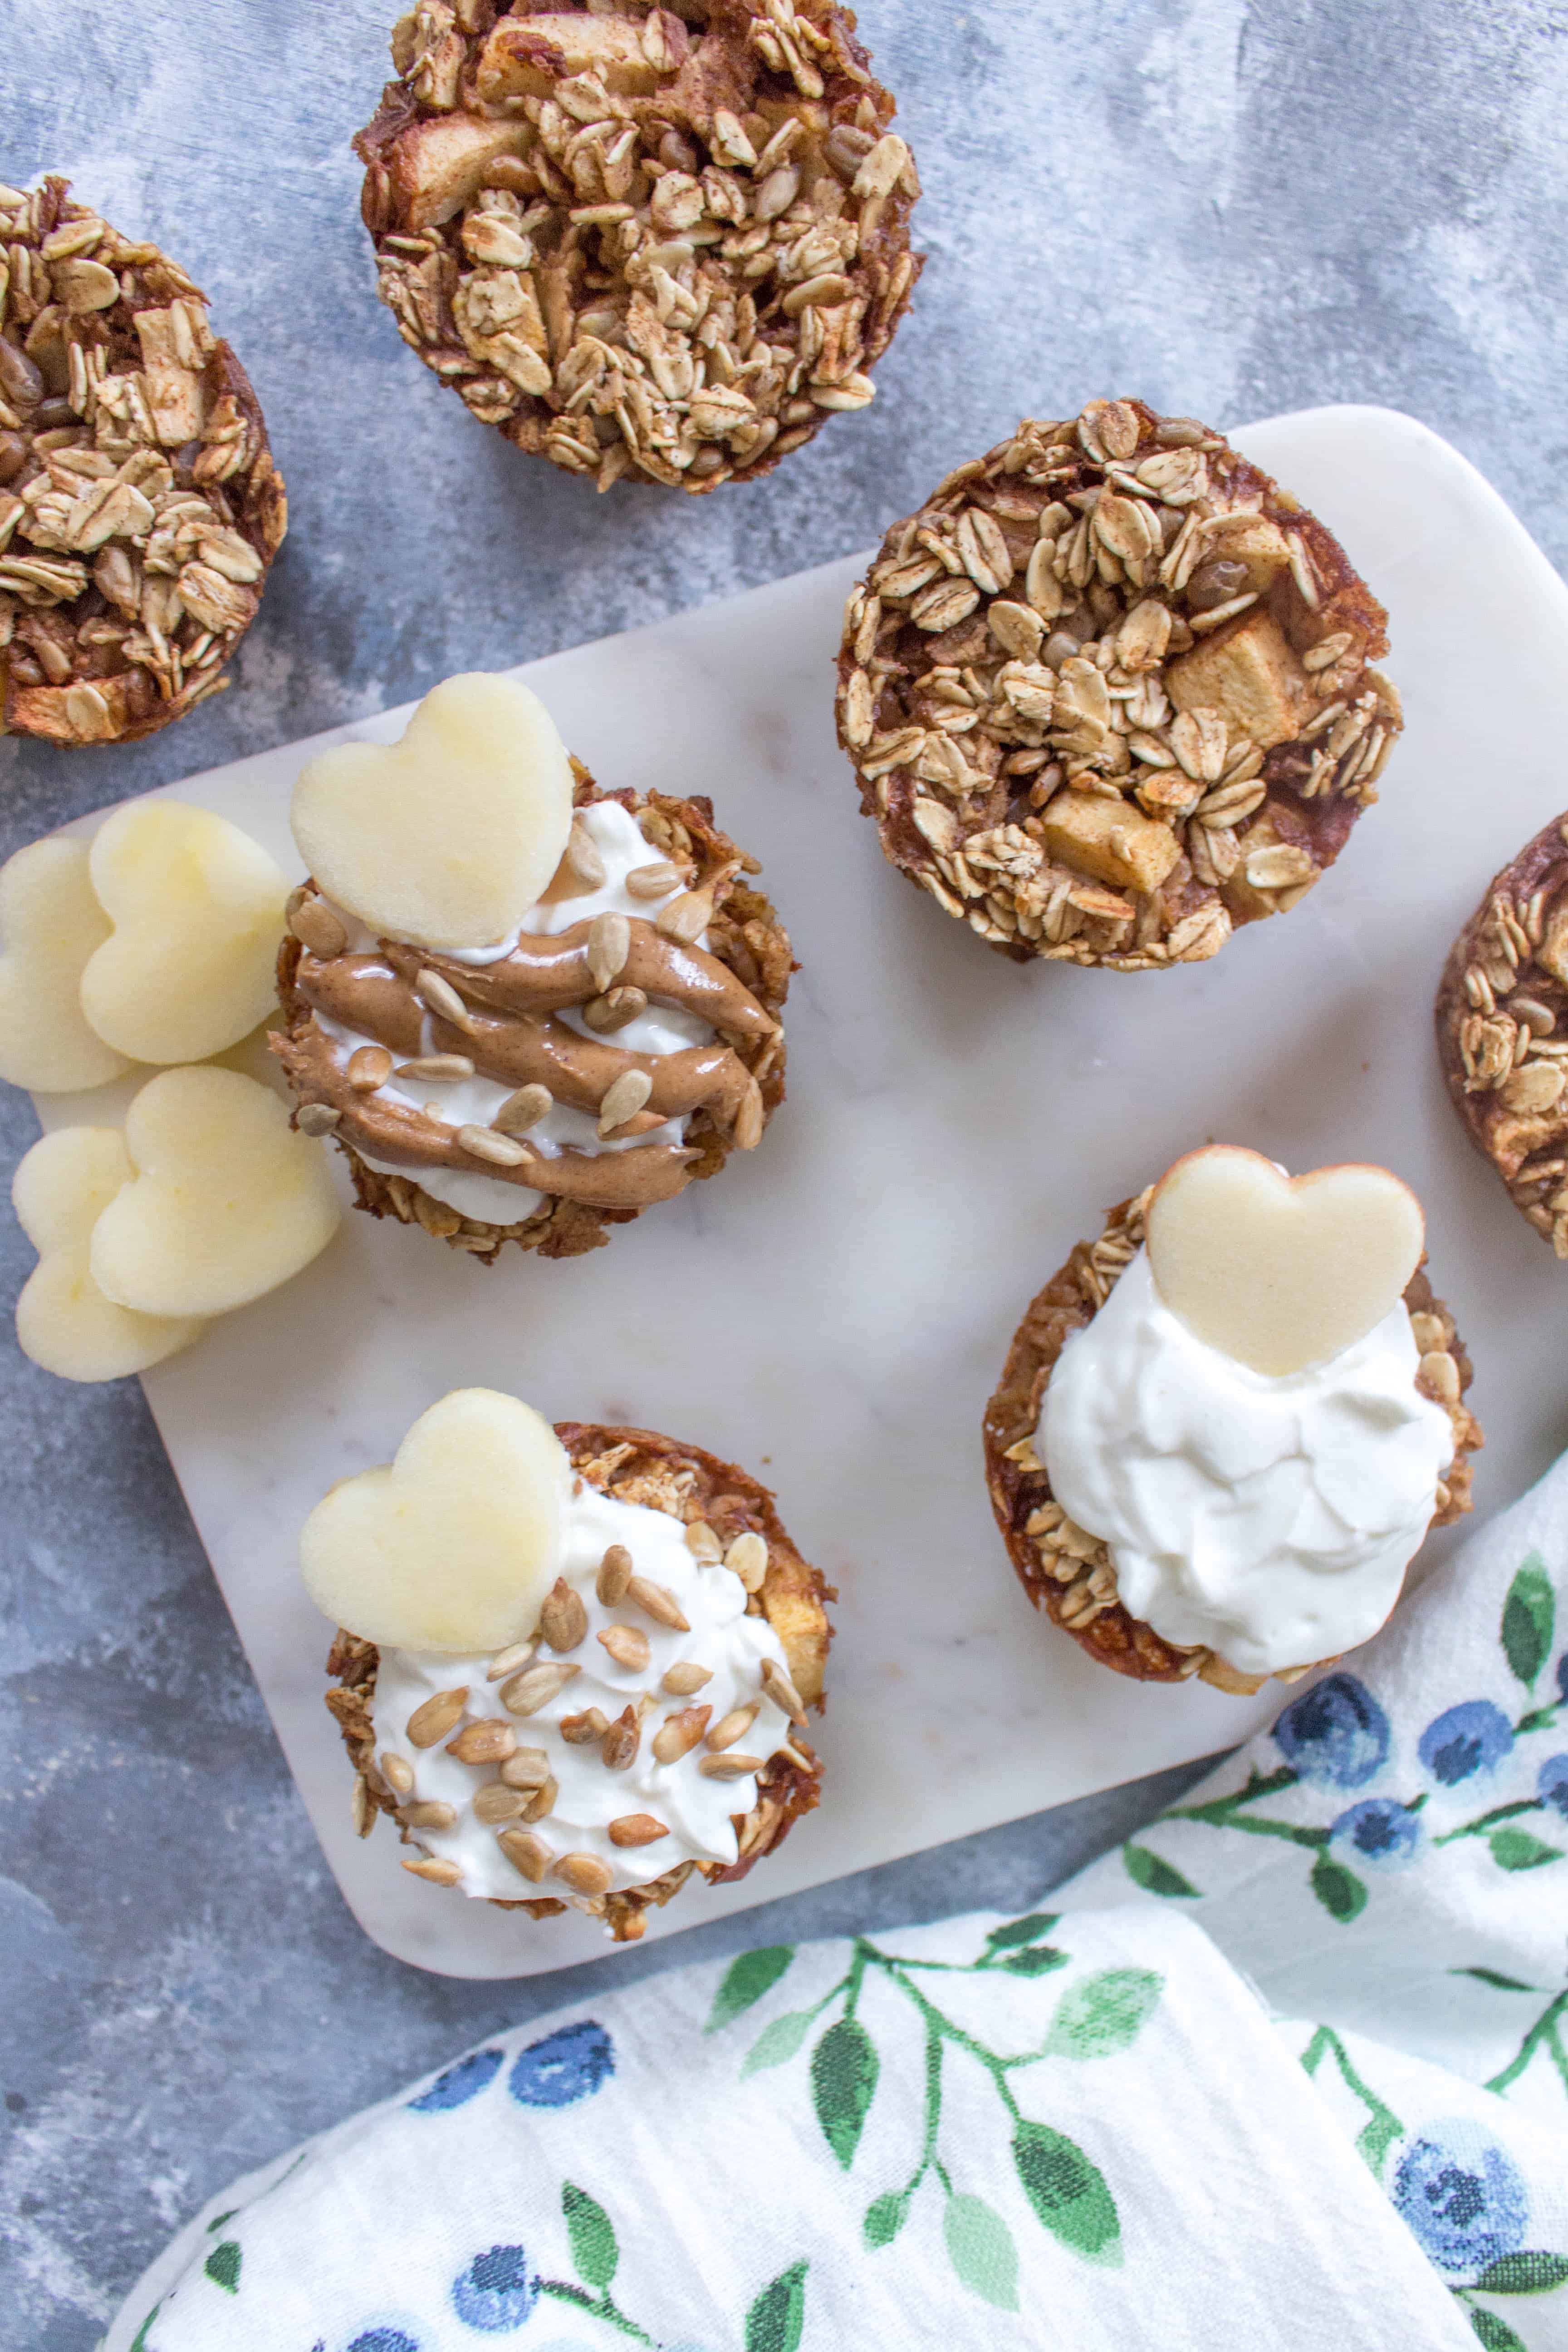 Healthy Breakfast Ideas: Start your morning off deliciously with these healthy baked apple oatmeal cups!